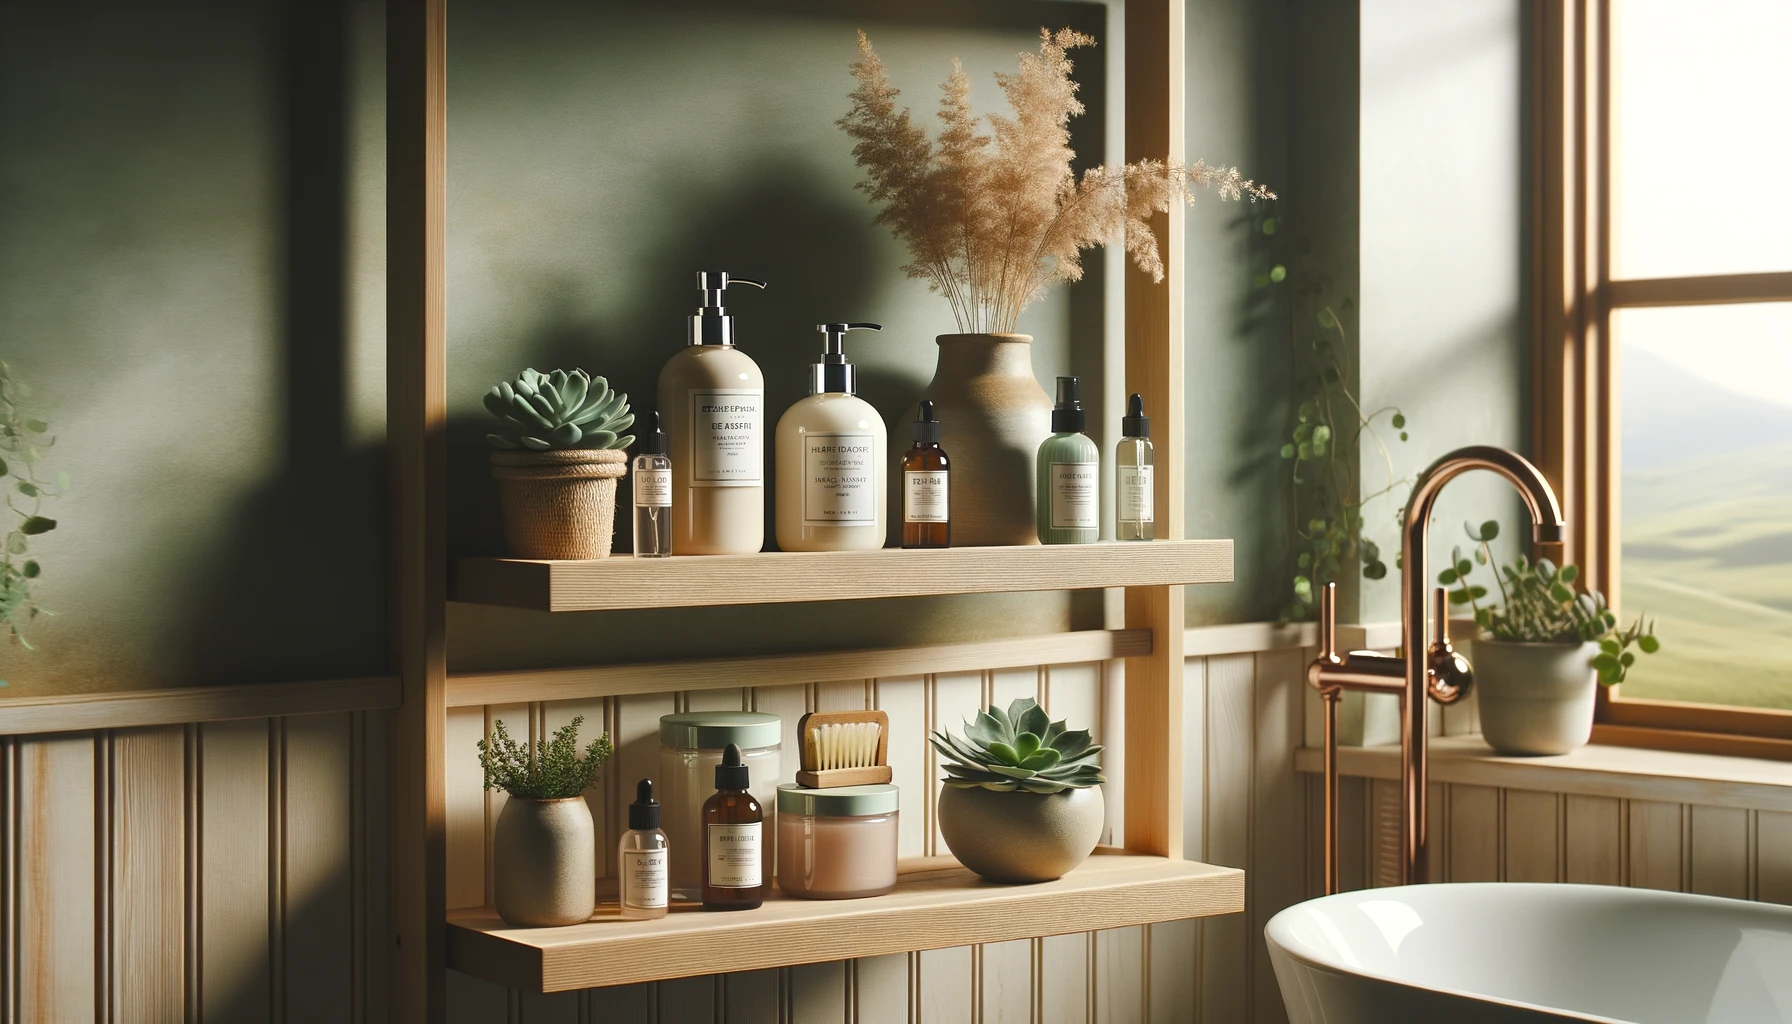 Eco-friendly vegan skincare products arranged on a wooden shelf in a modern bathroom, promoting cruelty-free beauty.